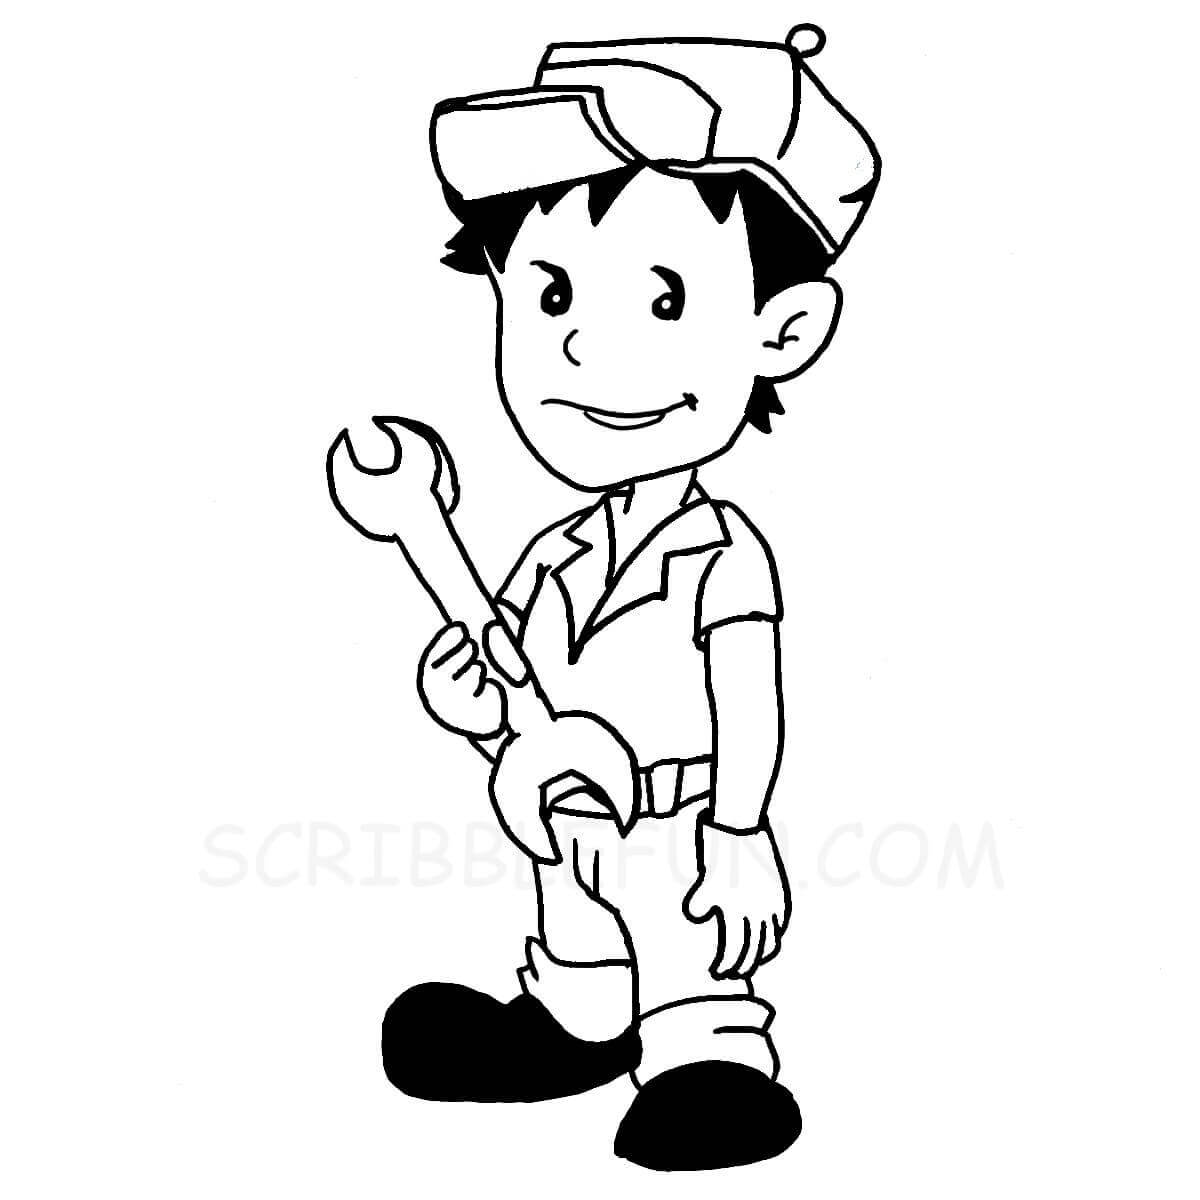 Car mechanic coloring page